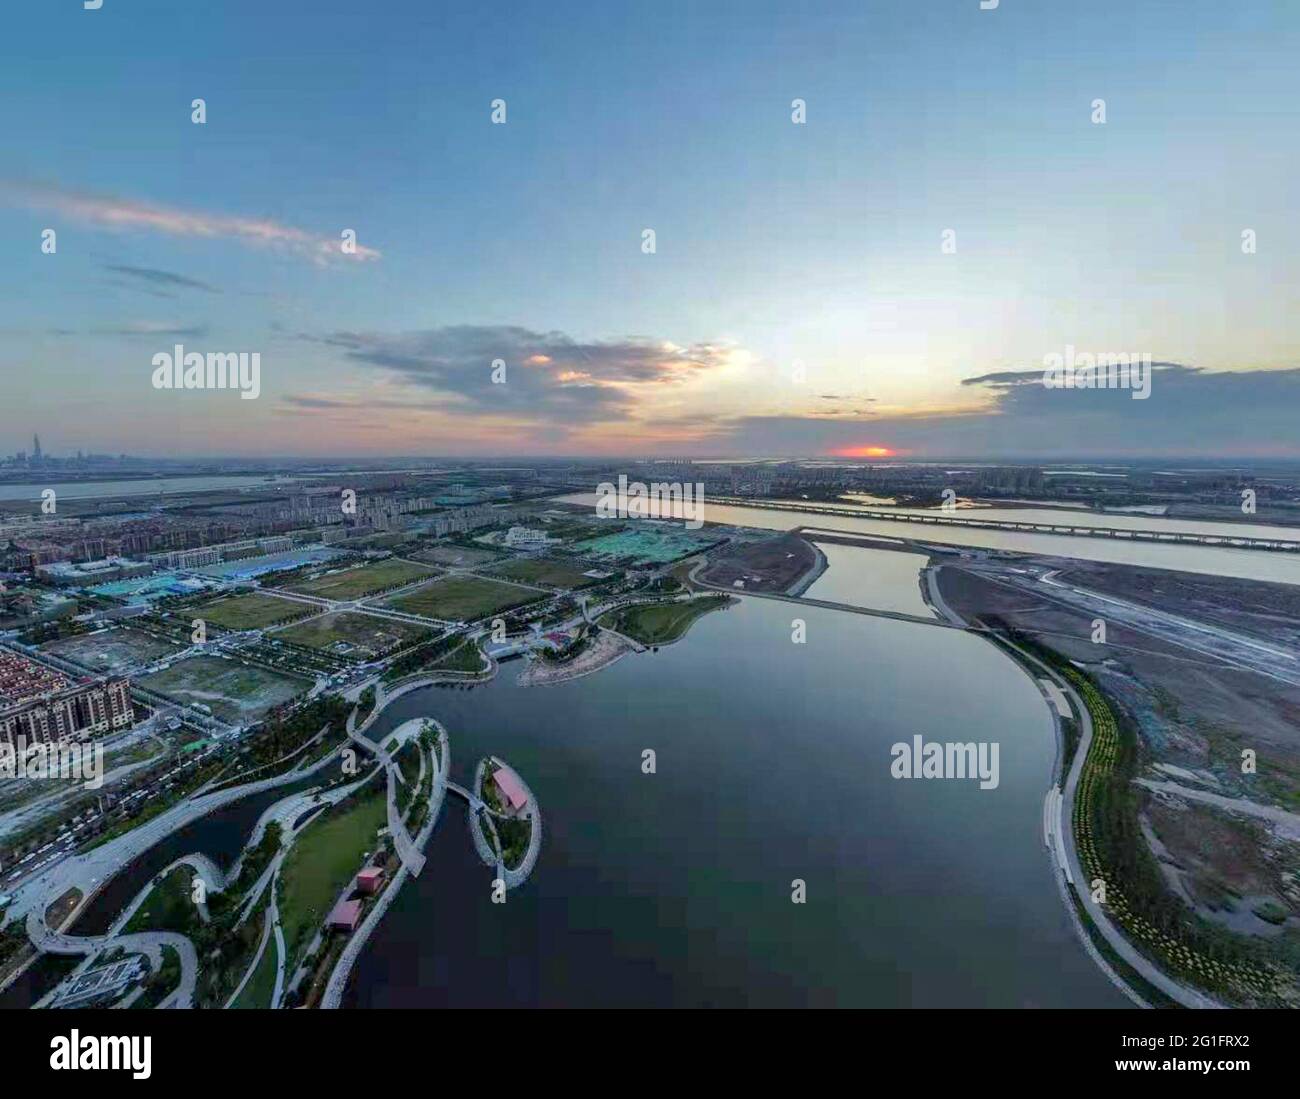 (210607) -- TIANJIN, June 7, 2021 (Xinhua) -- Aerial photo taken on June 5, 2021 shows a seaside park in the Binhai New Area of north China's Tianjin. Tianjin in north China boasts rich biodiversity along a 153-km coastline made up of muddy tidal flats. Over the years, the city has worked on pollution control and shoreline management of the Bohai Sea to restore its coastal wetlands, while stricter measures on land reclamation have been implemented. In 2020, 70.4 percent of Tianjin's offshore waters achieved sound quality under a three-year action plan to battle water pollution. Now the Stock Photo